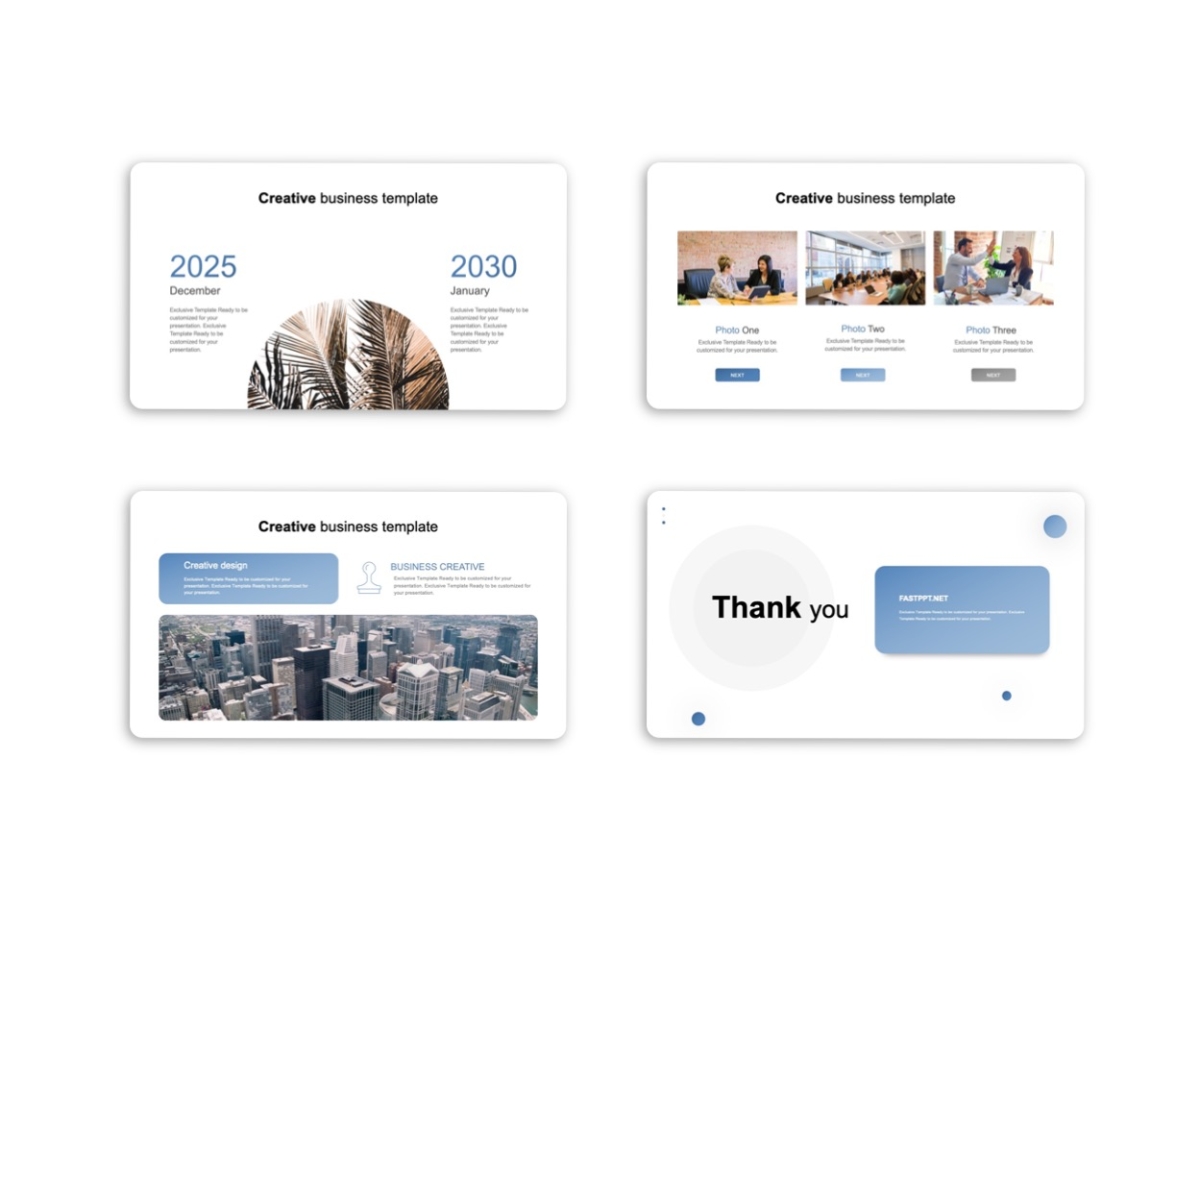 Report Proposal Multipurpose Powerpoint Template